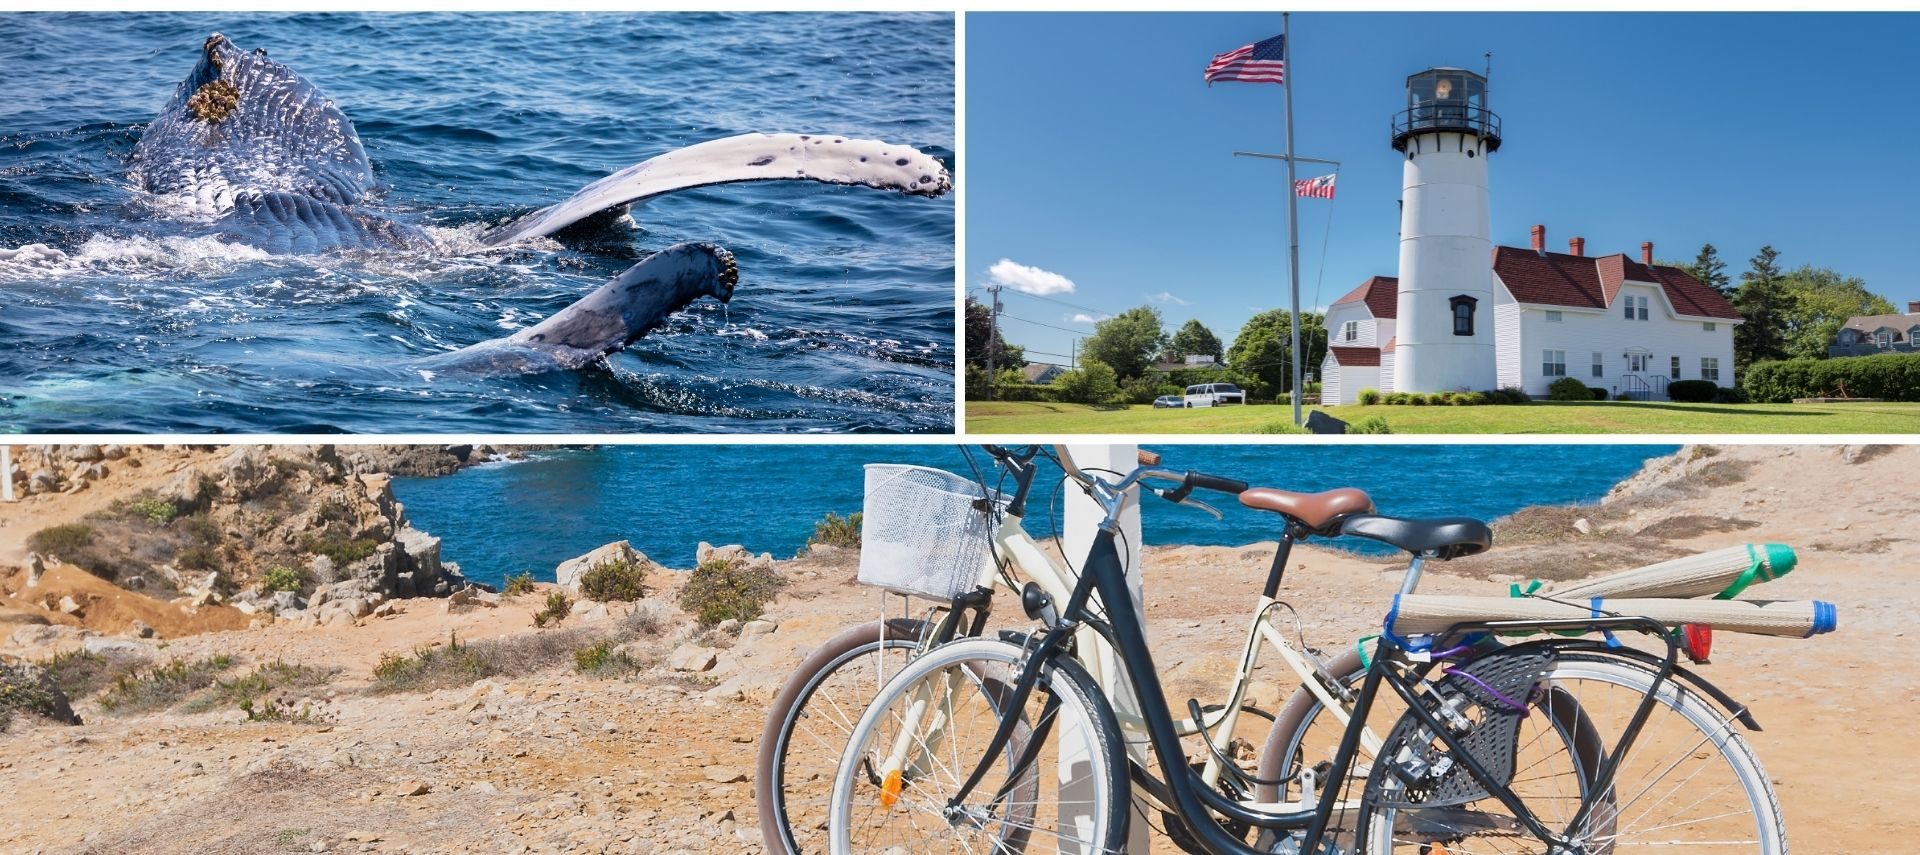 3 images: one of a whale, one of a Cape Cod lighthouse, and one of bicycles on the beach